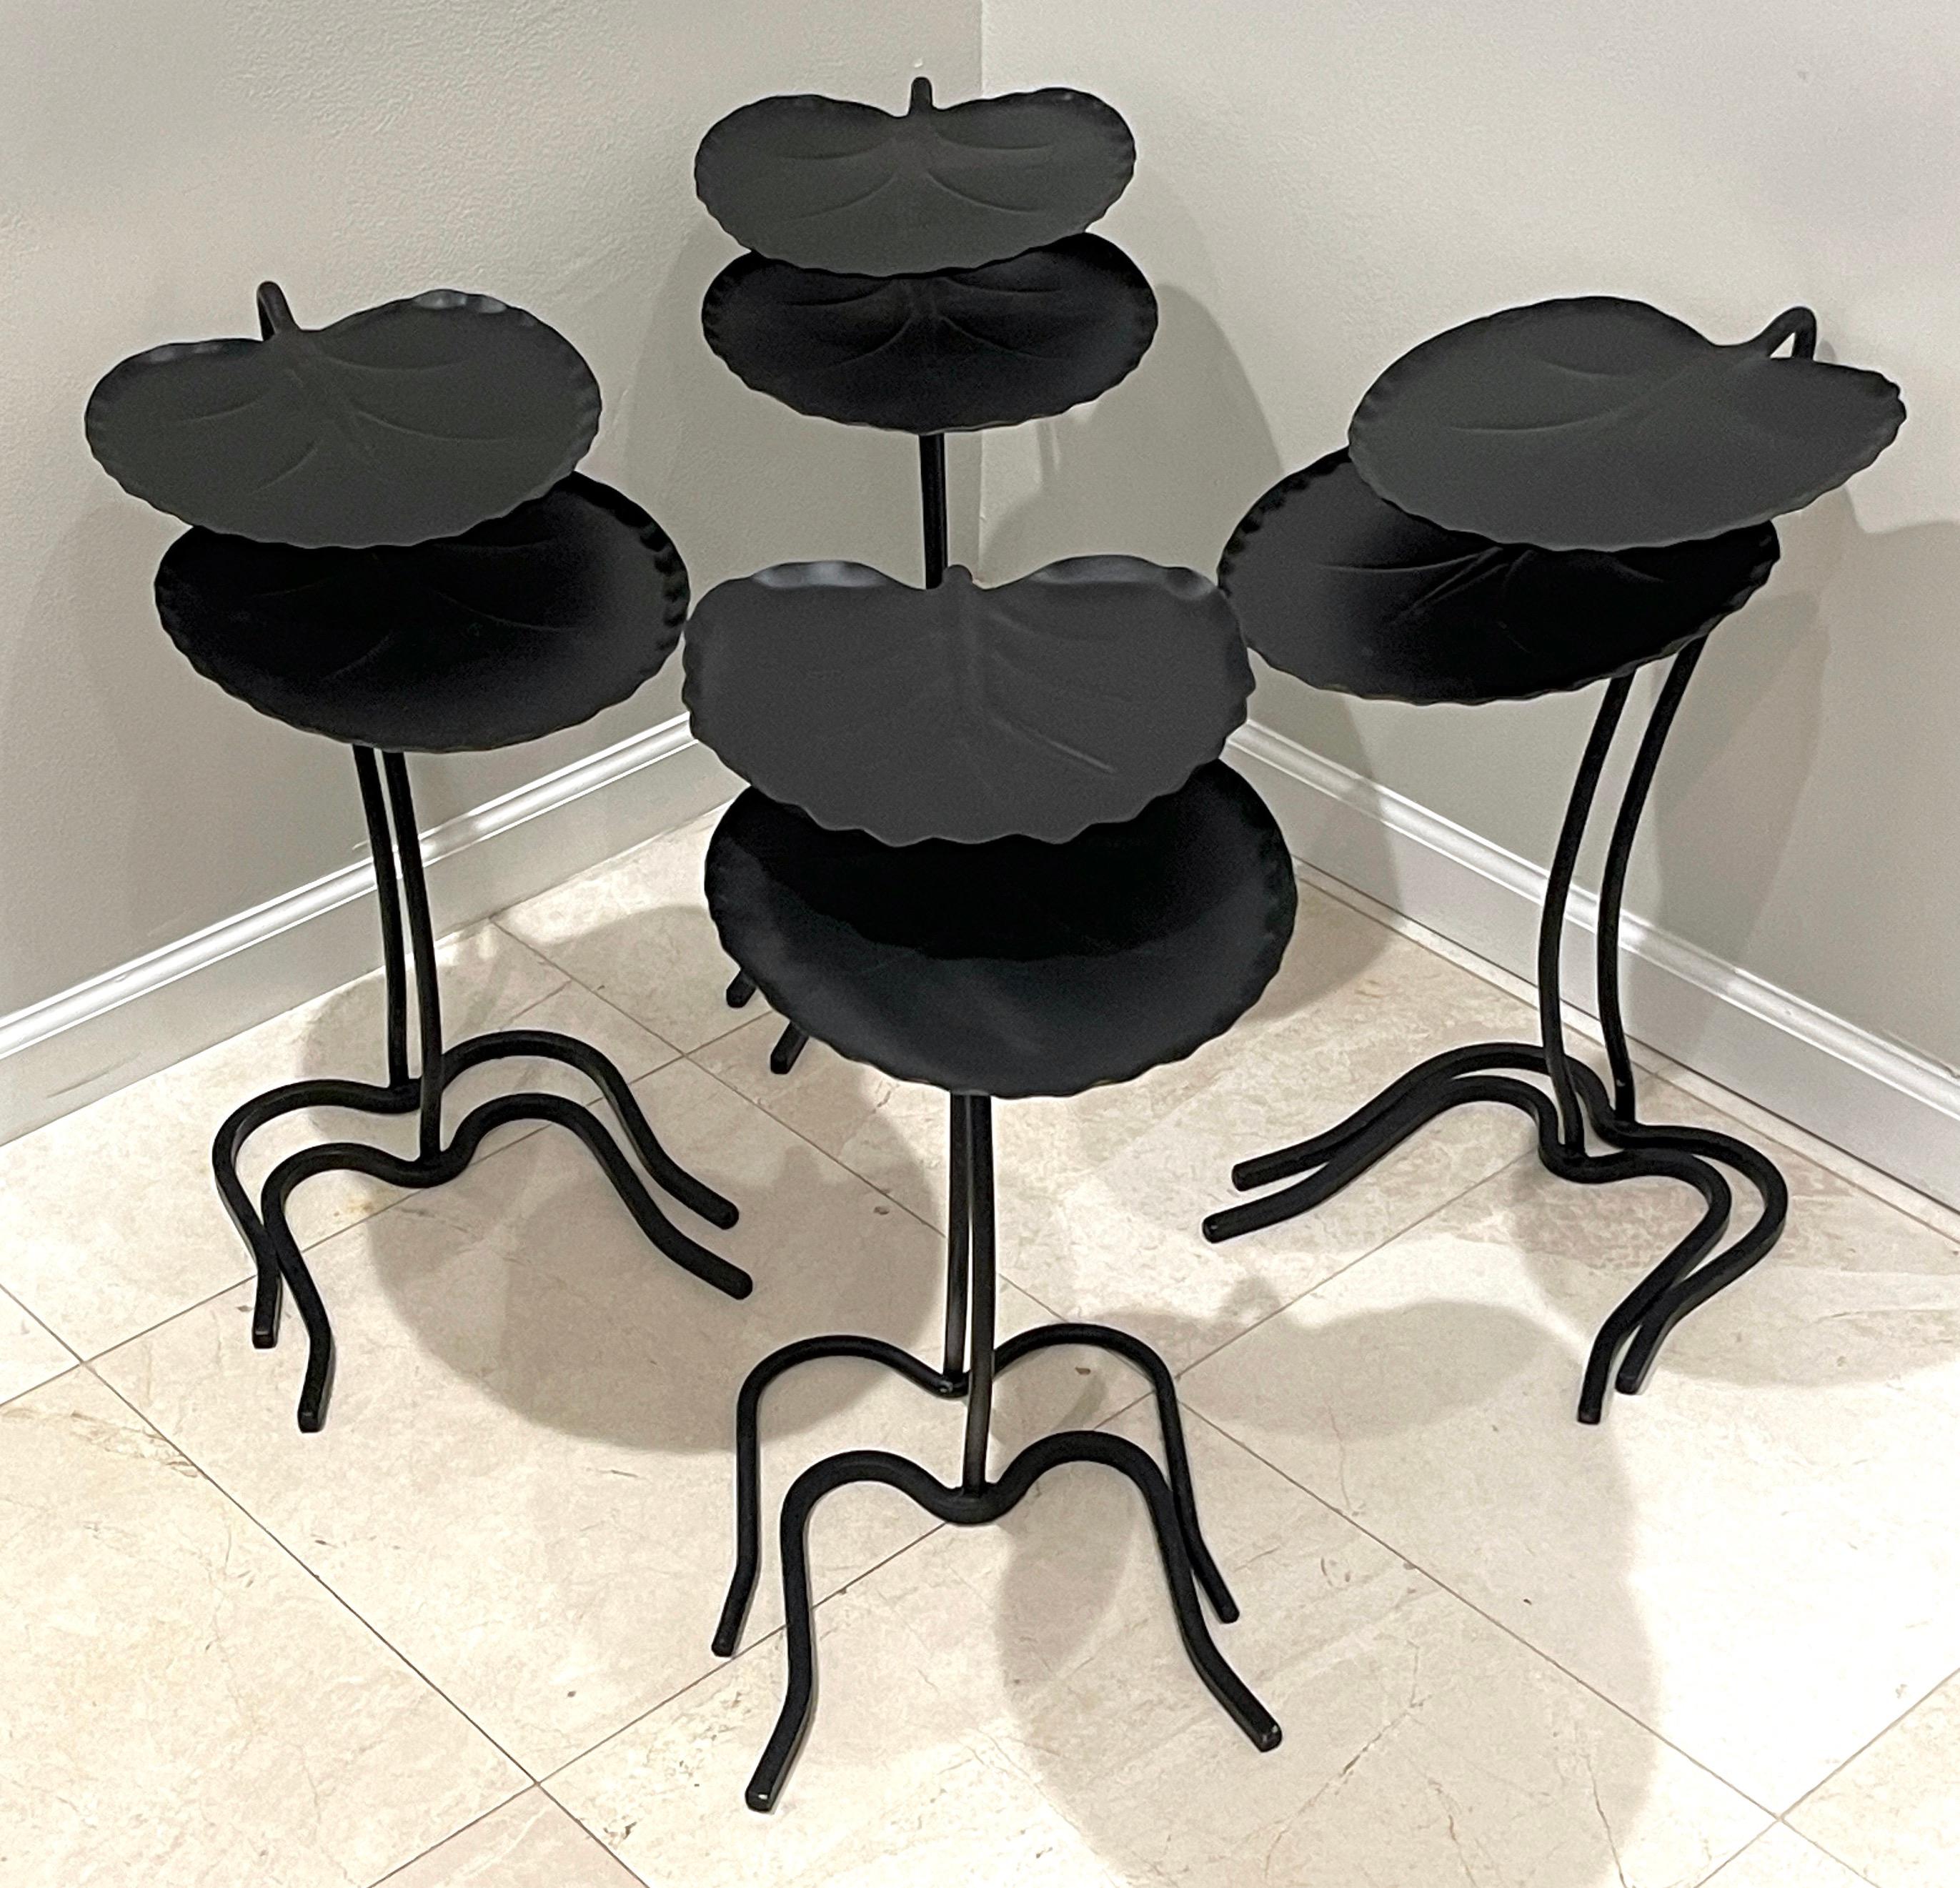 Three Pair of Salterini/ Tempestini  Lily Pad Nesting Tables,  Sold in Pairs
USA, Circa 1950s
The list price is for two tables as pictured one taller one shorter. 

A rare opportunity (at the time of posting ) to acquire up to three pairs of one the